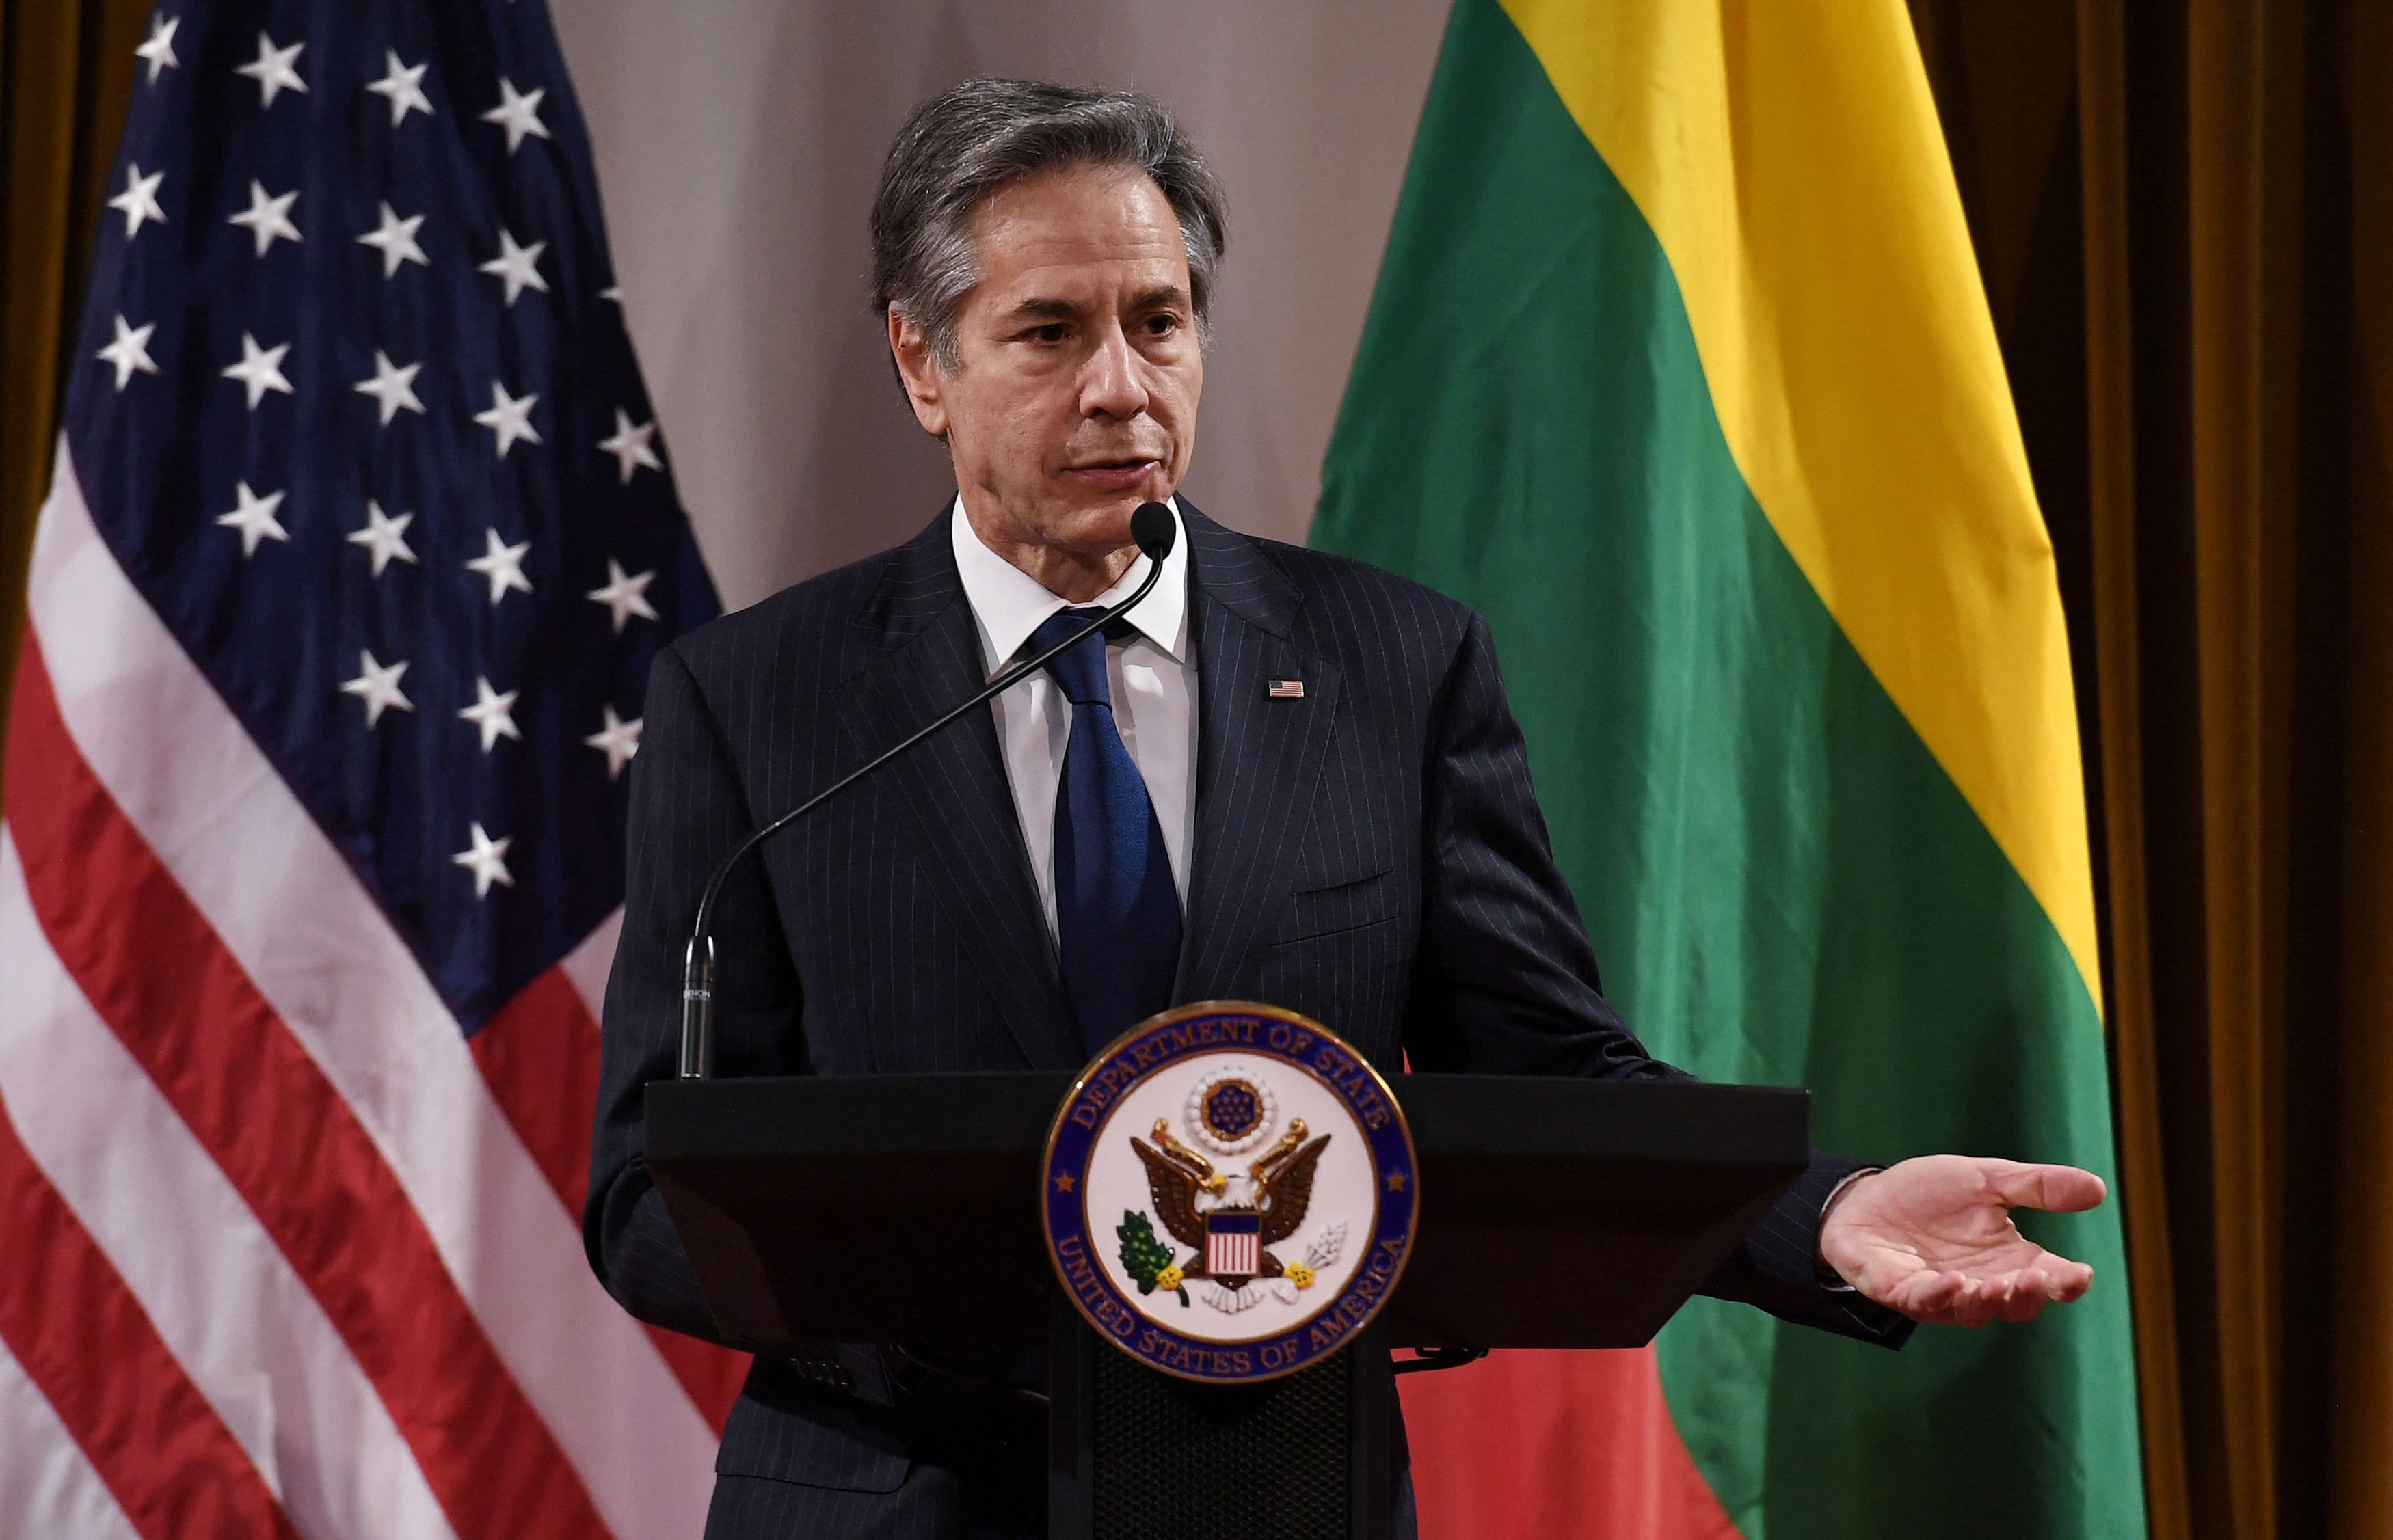 Secretary of State Blinken tells NATO ally Lithuania 'an attack on one is an attack on all'